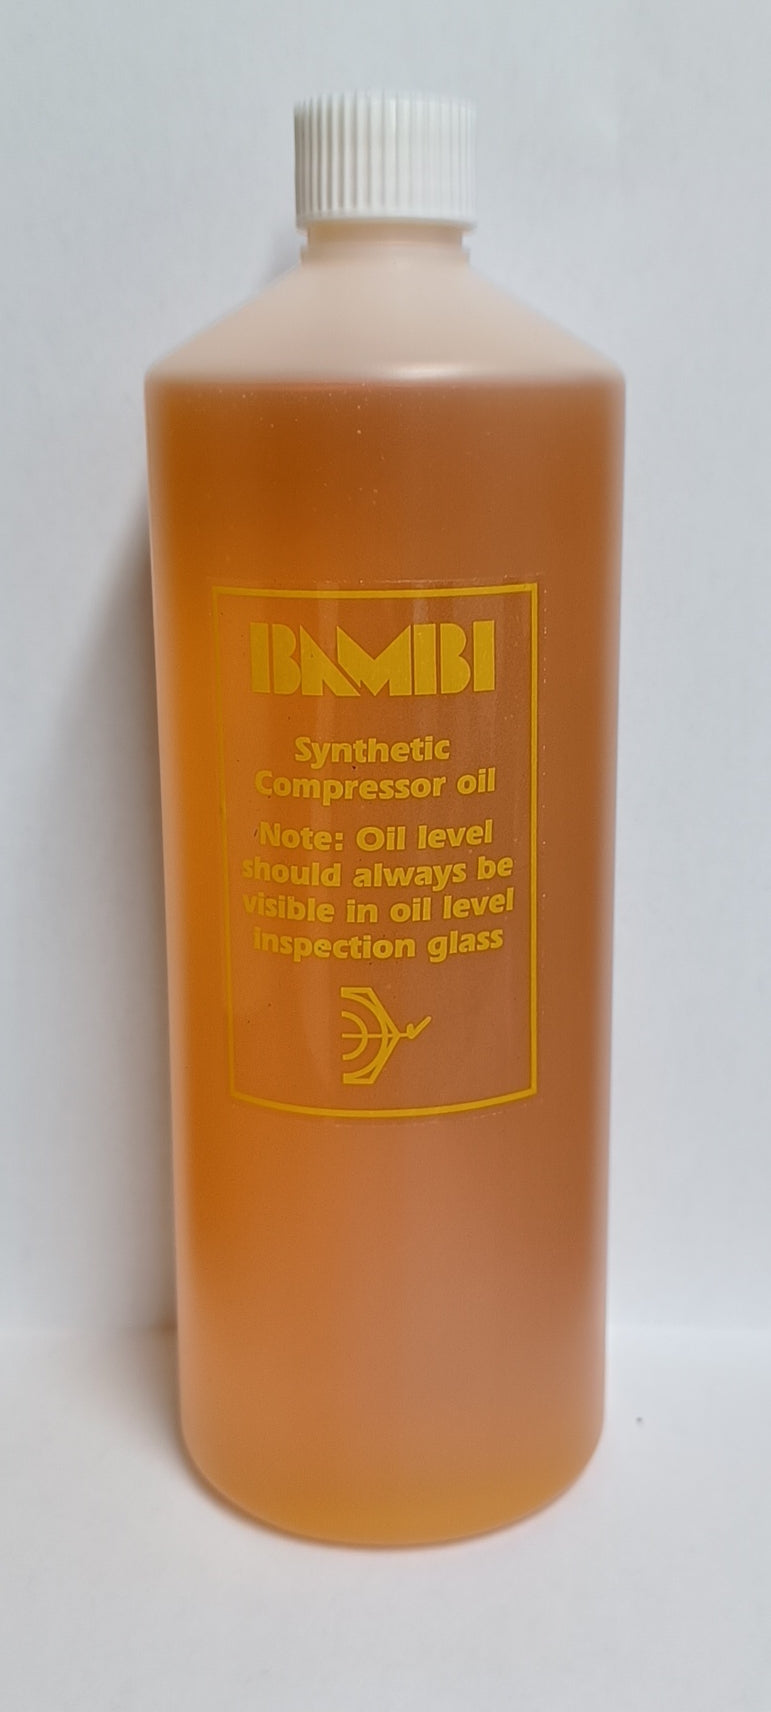 BPB1110S OEM BAMBI SYNTHETIC COMPRESSOR OIL 1 LITRE